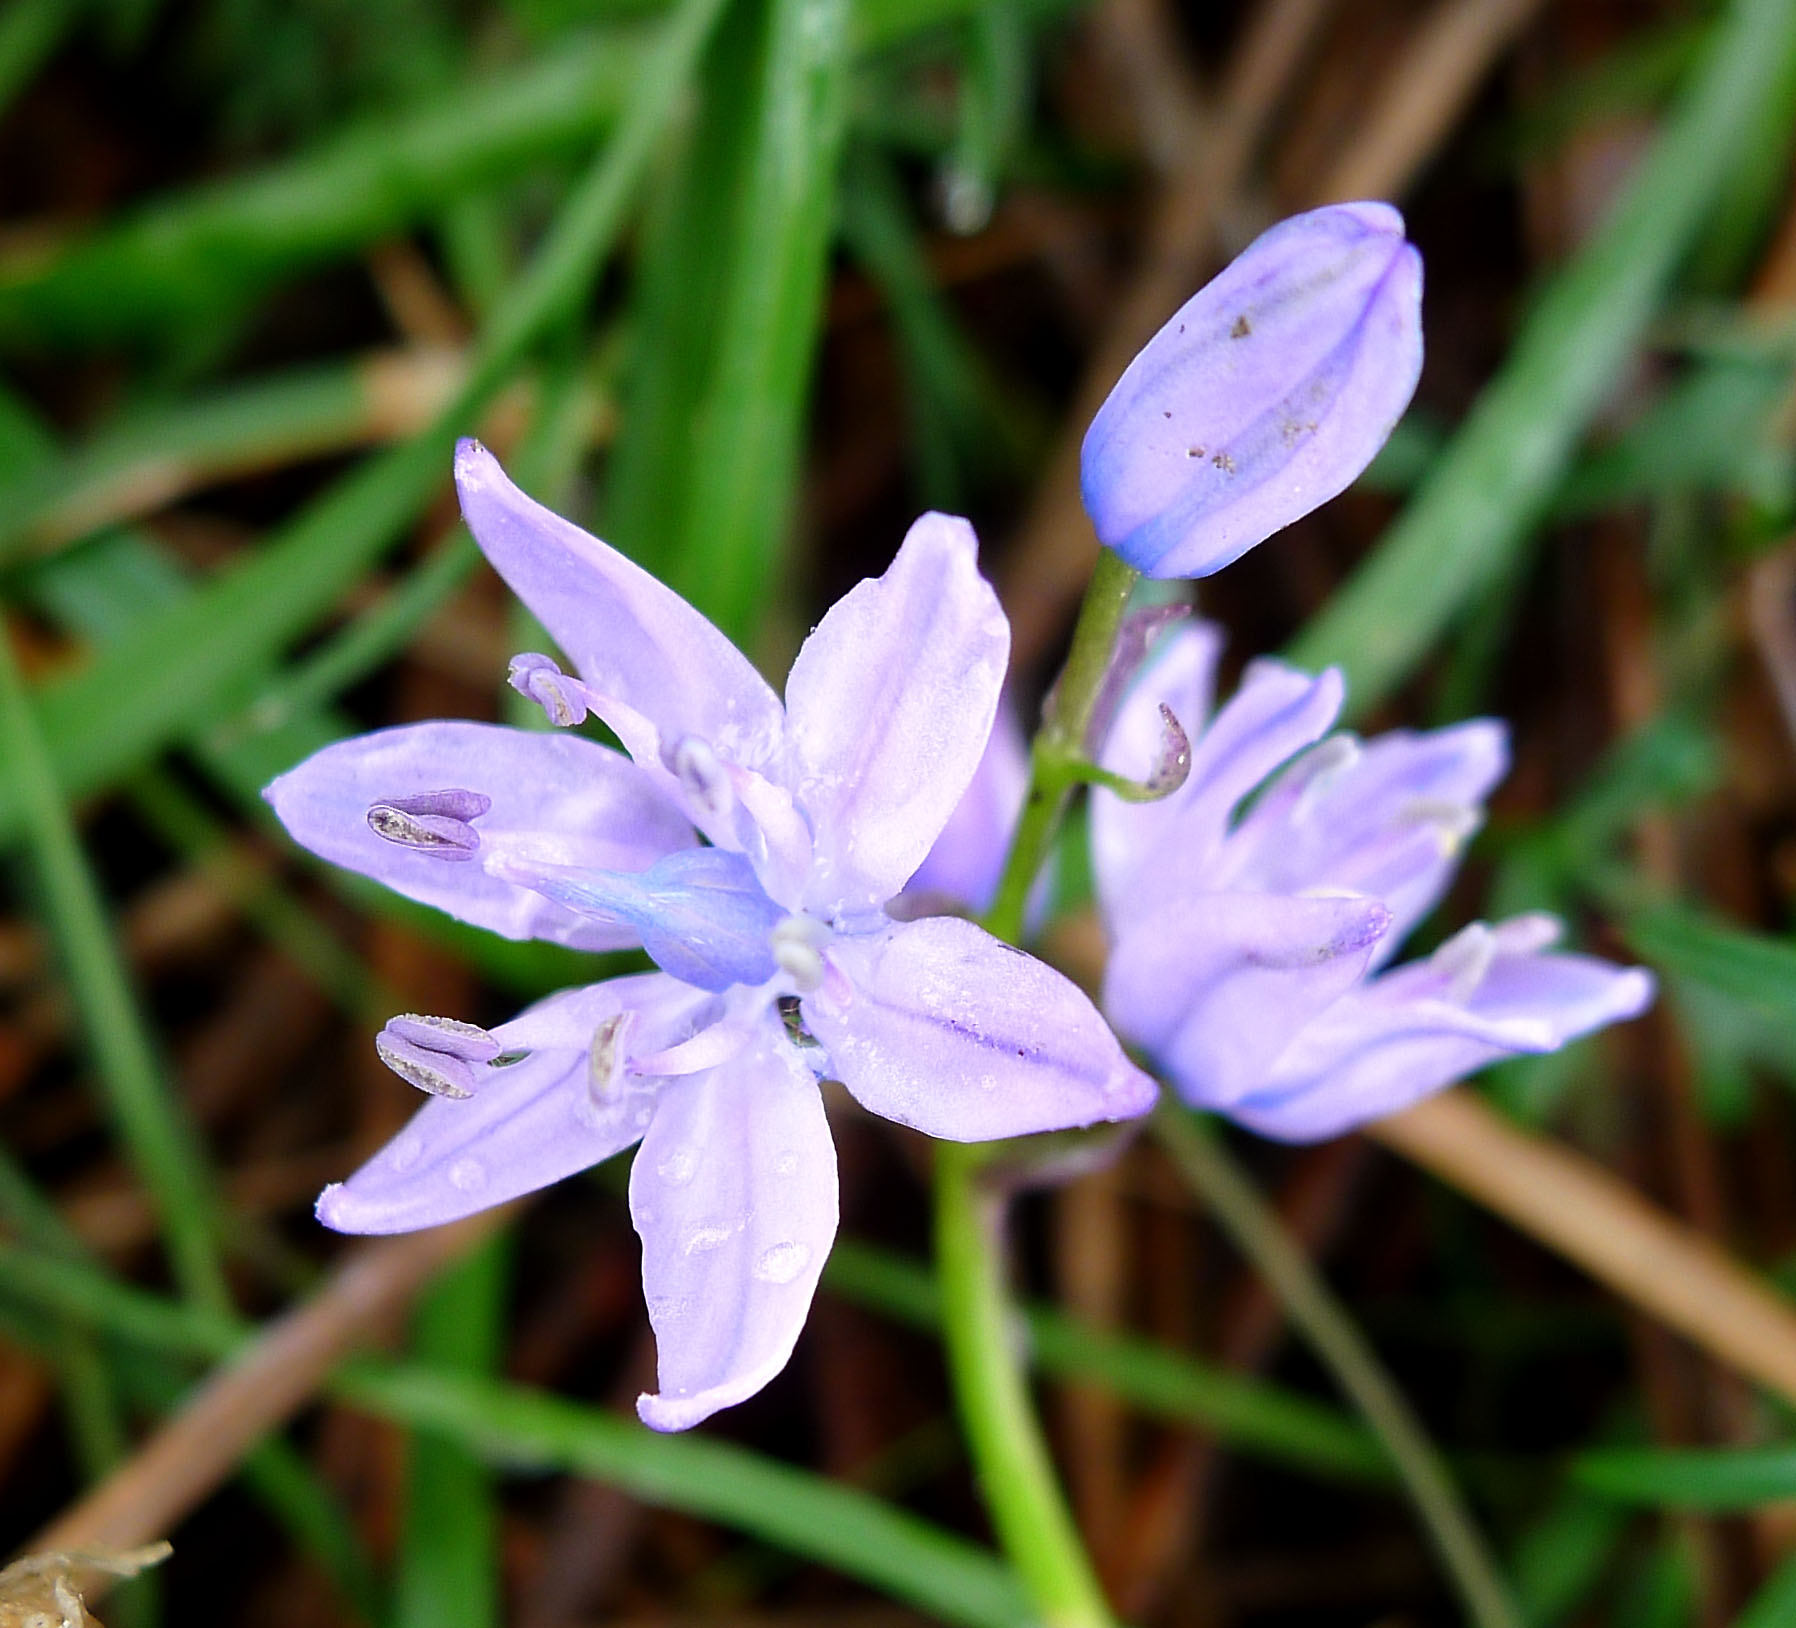 there are small purple flowers that appear to be growing on the grass